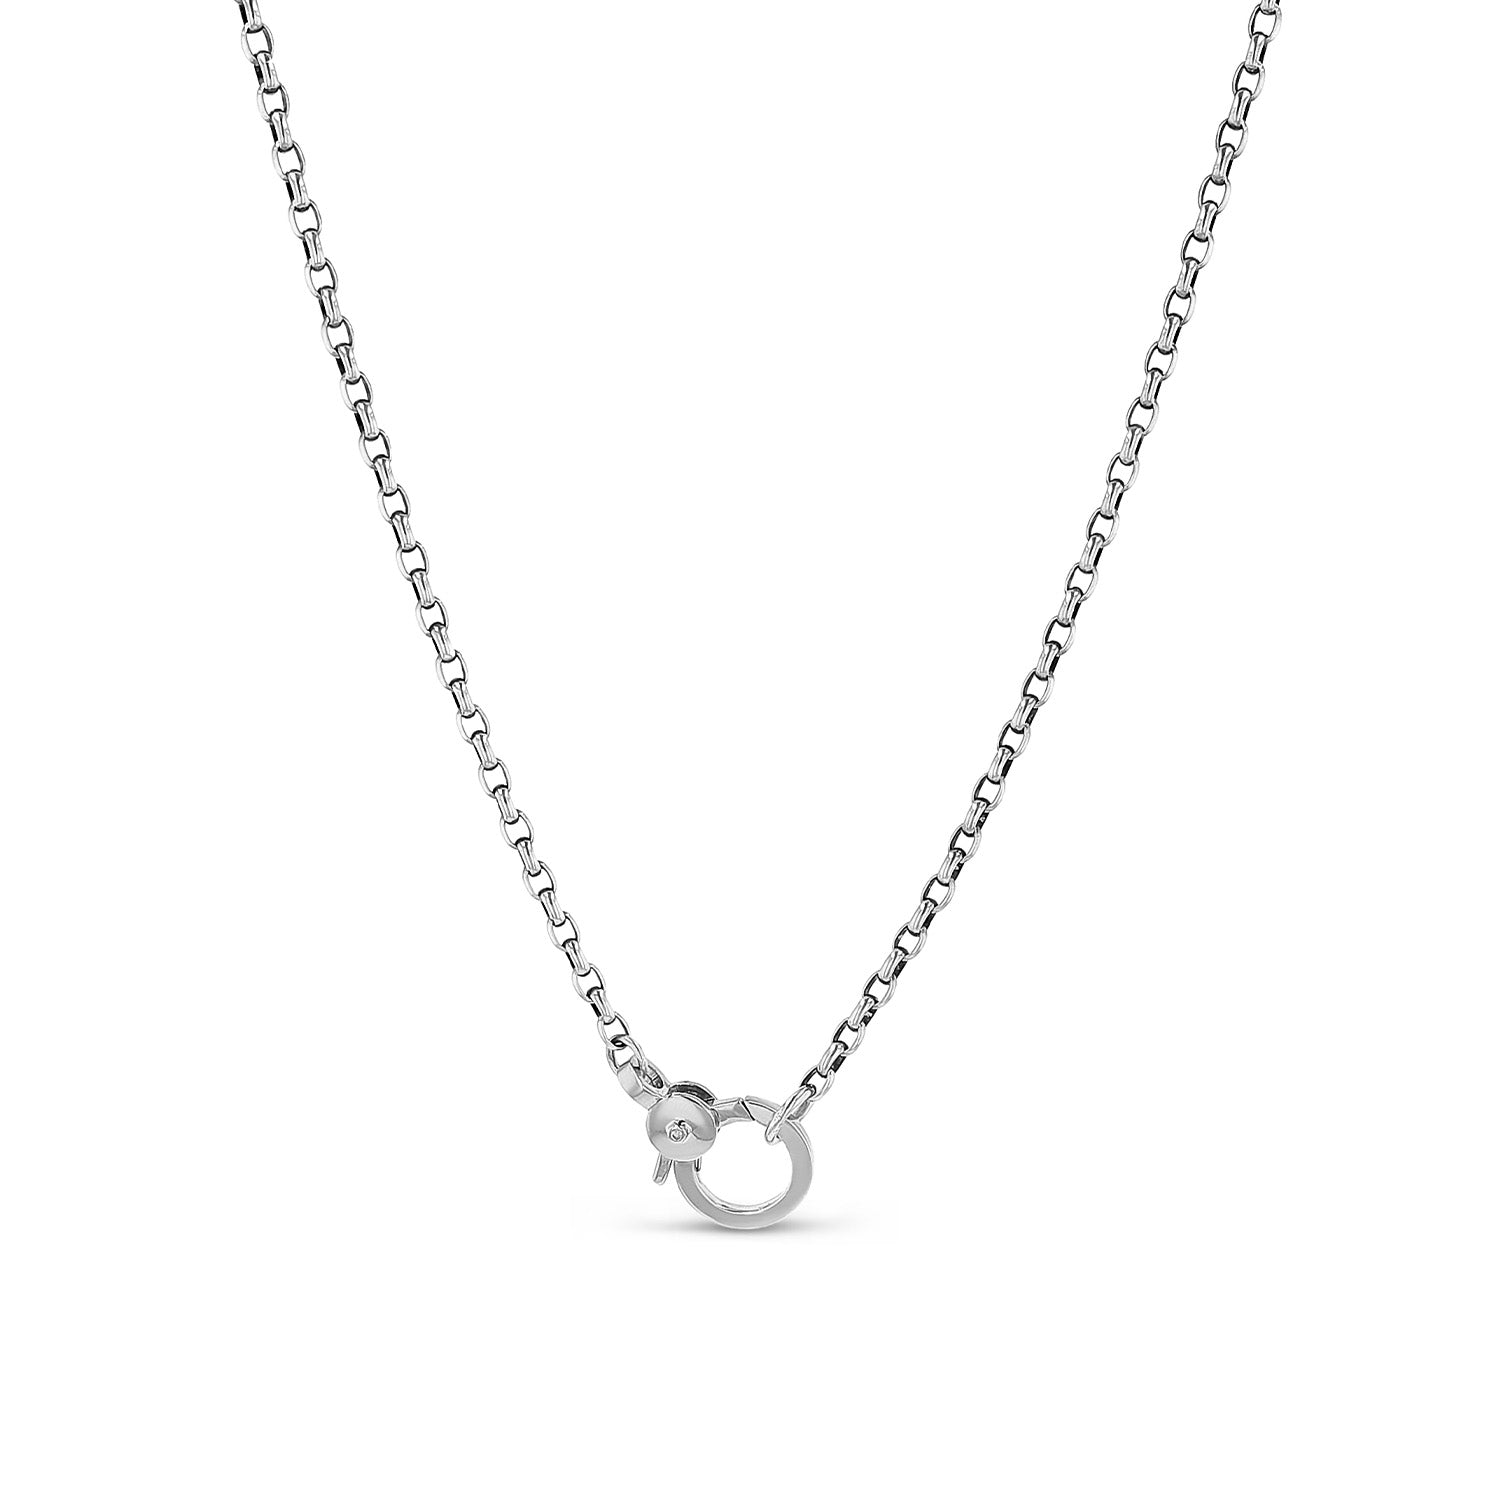 Silver Box Chain Necklace with Single Diamond Claw Clasp - 17"  NB000648 - TBird